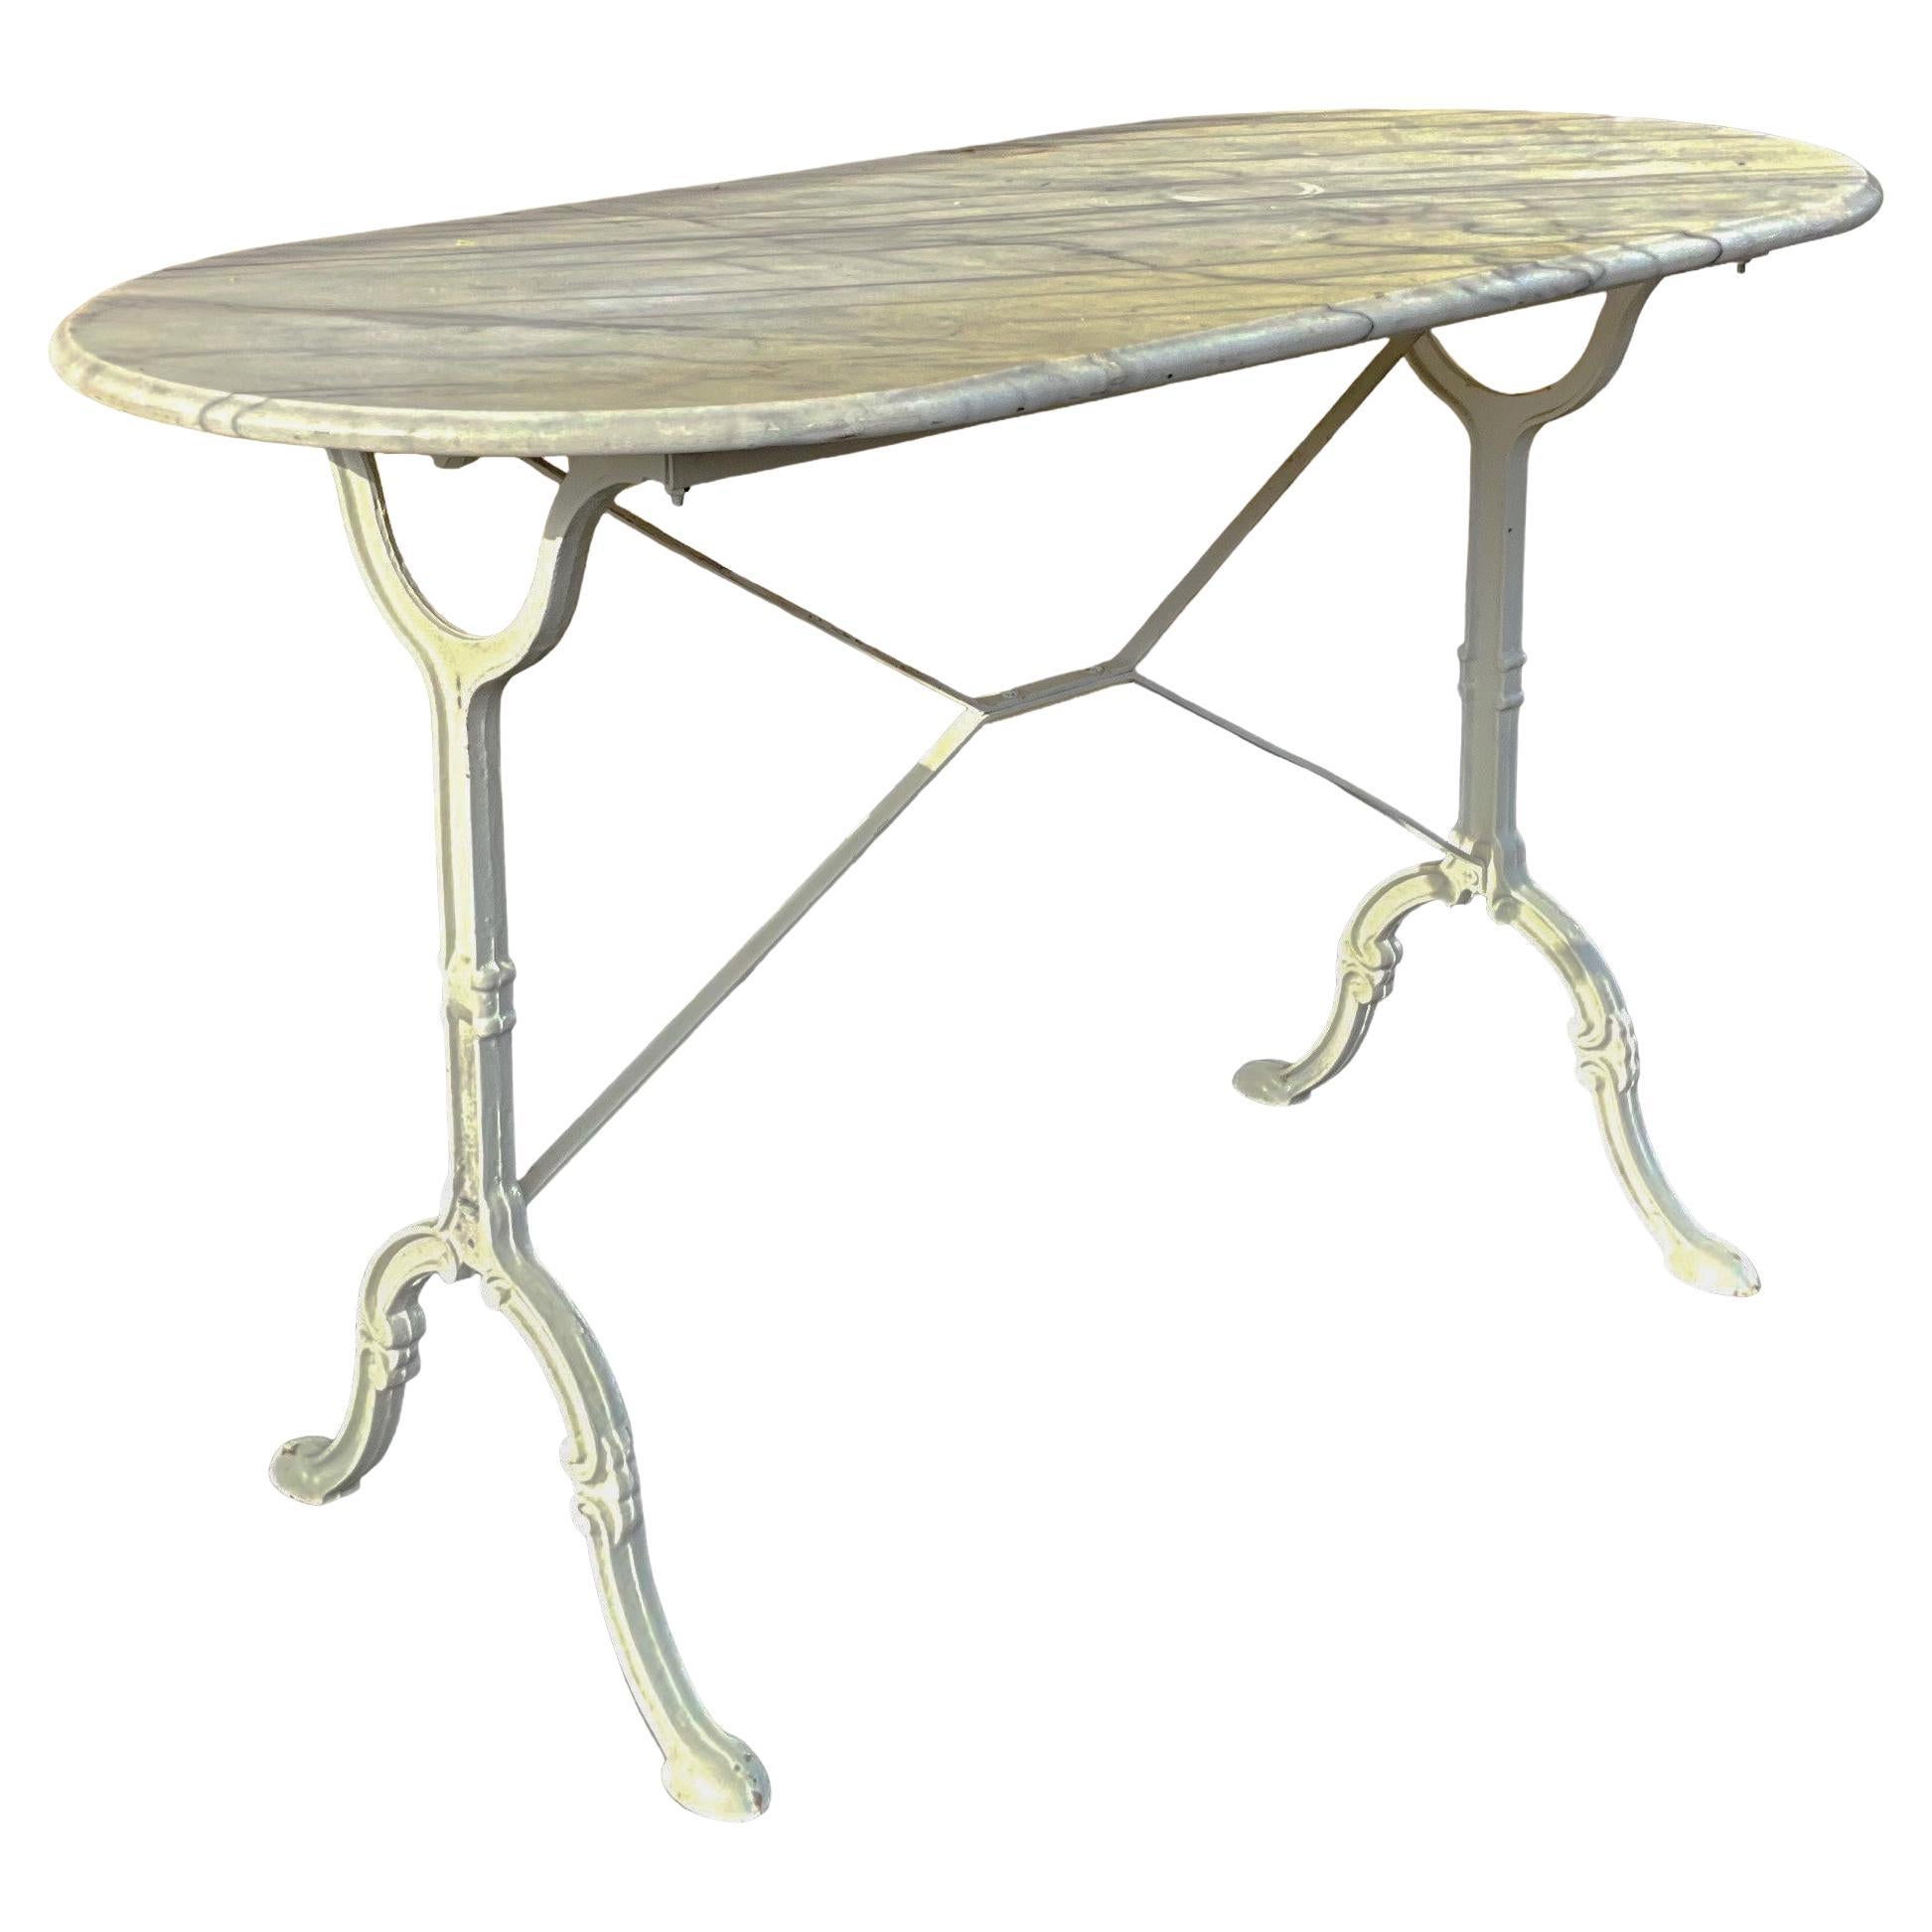 Early 20th Century French Marble Top & Iron Console / Garden / Bistro Table For Sale